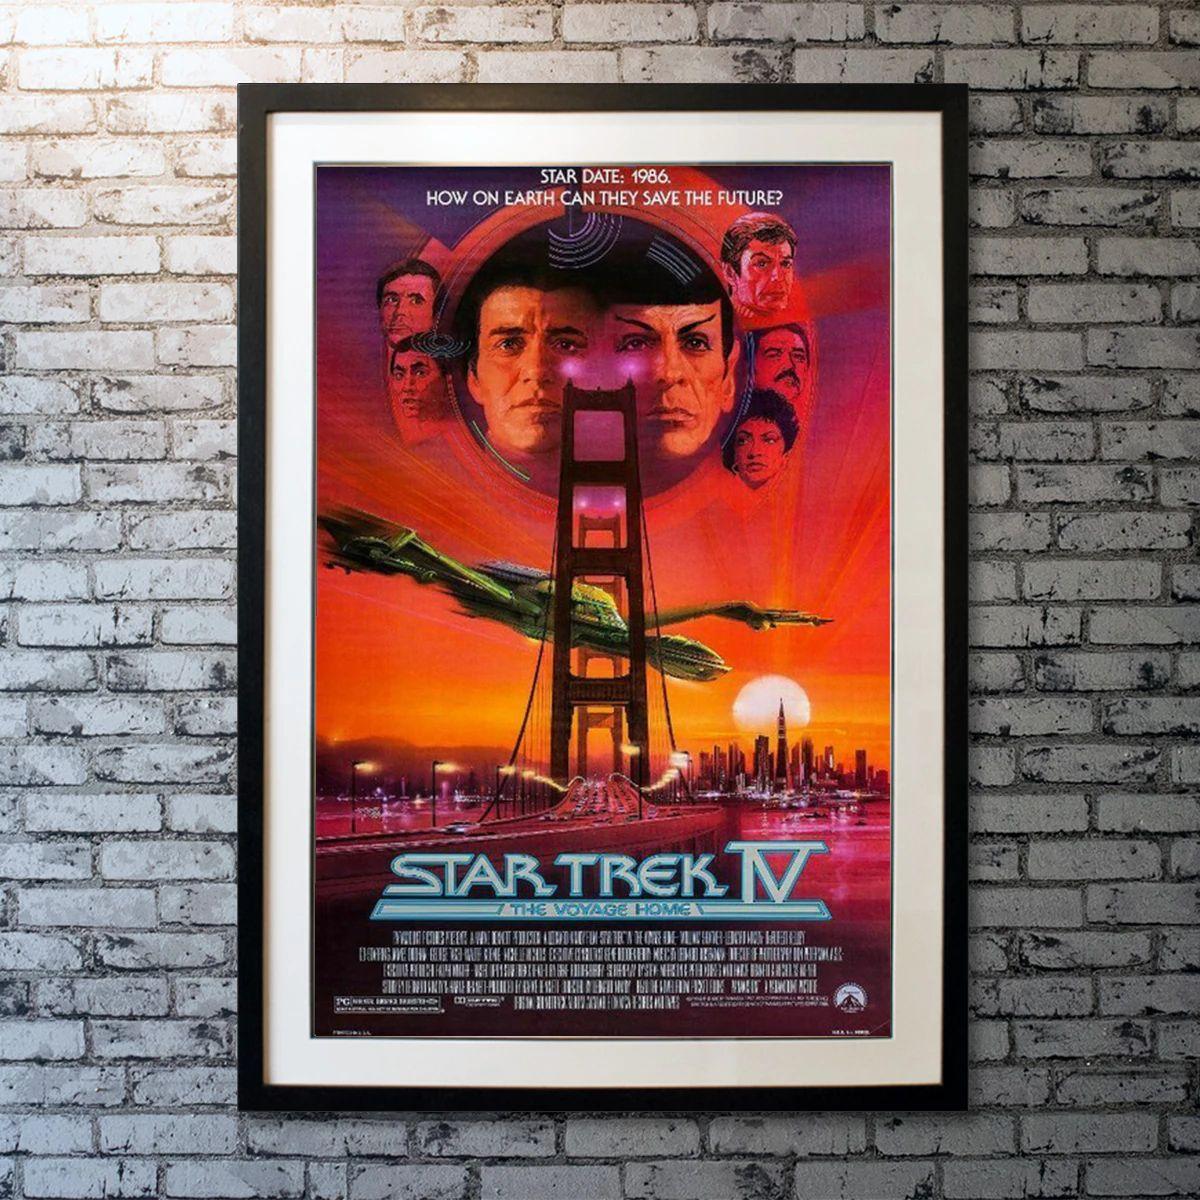 Star Trek IV: The Voyage Home, Unframed Poster, 1986

Original One Sheet (27 X 41 Inches). To save Earth from an alien probe, Admiral James T. Kirk and his fugitive crew go back in time to San Francisco in 1986 to retrieve the only beings who can